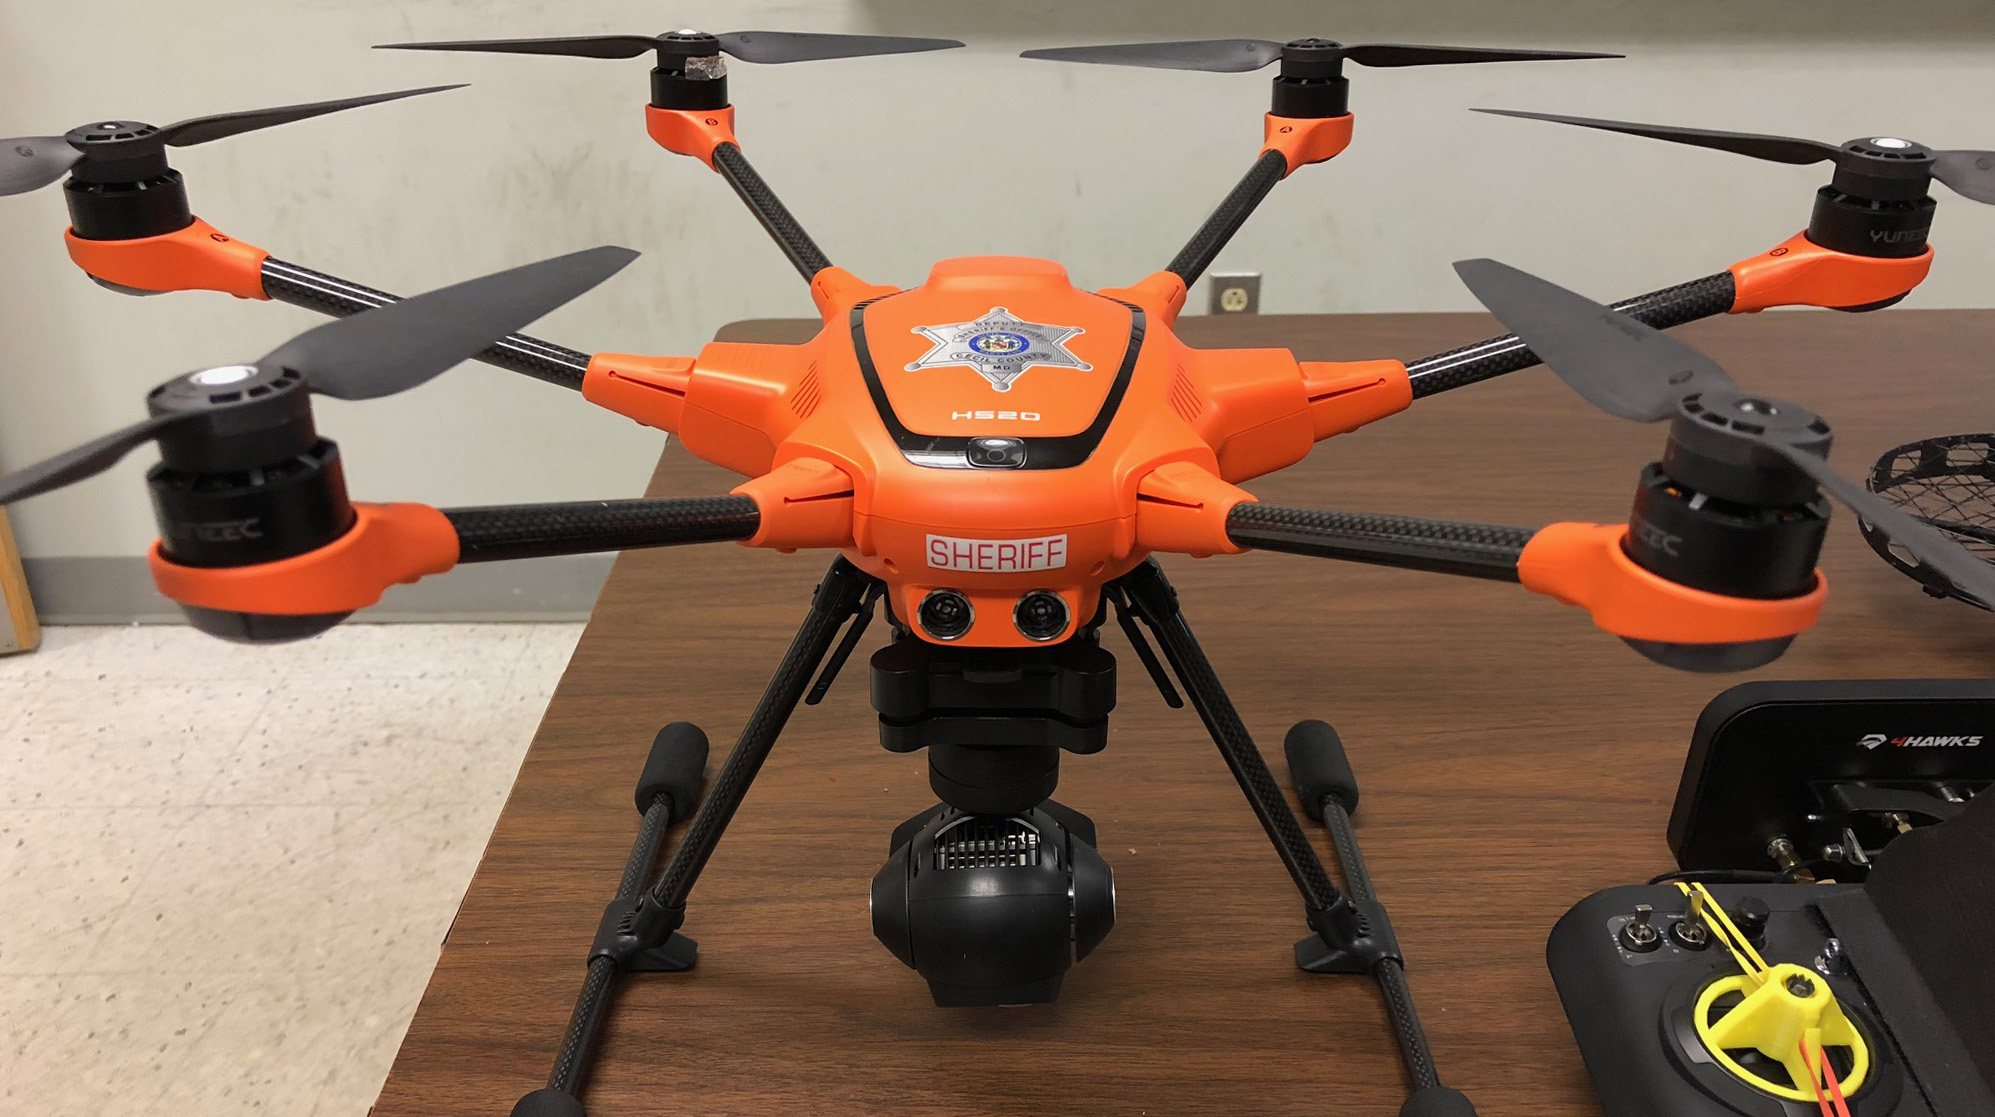 This Yuneec H520 provides both thermal and visible imaging capability. Photo courtesy of Cecil County Sheriff (Maryland).